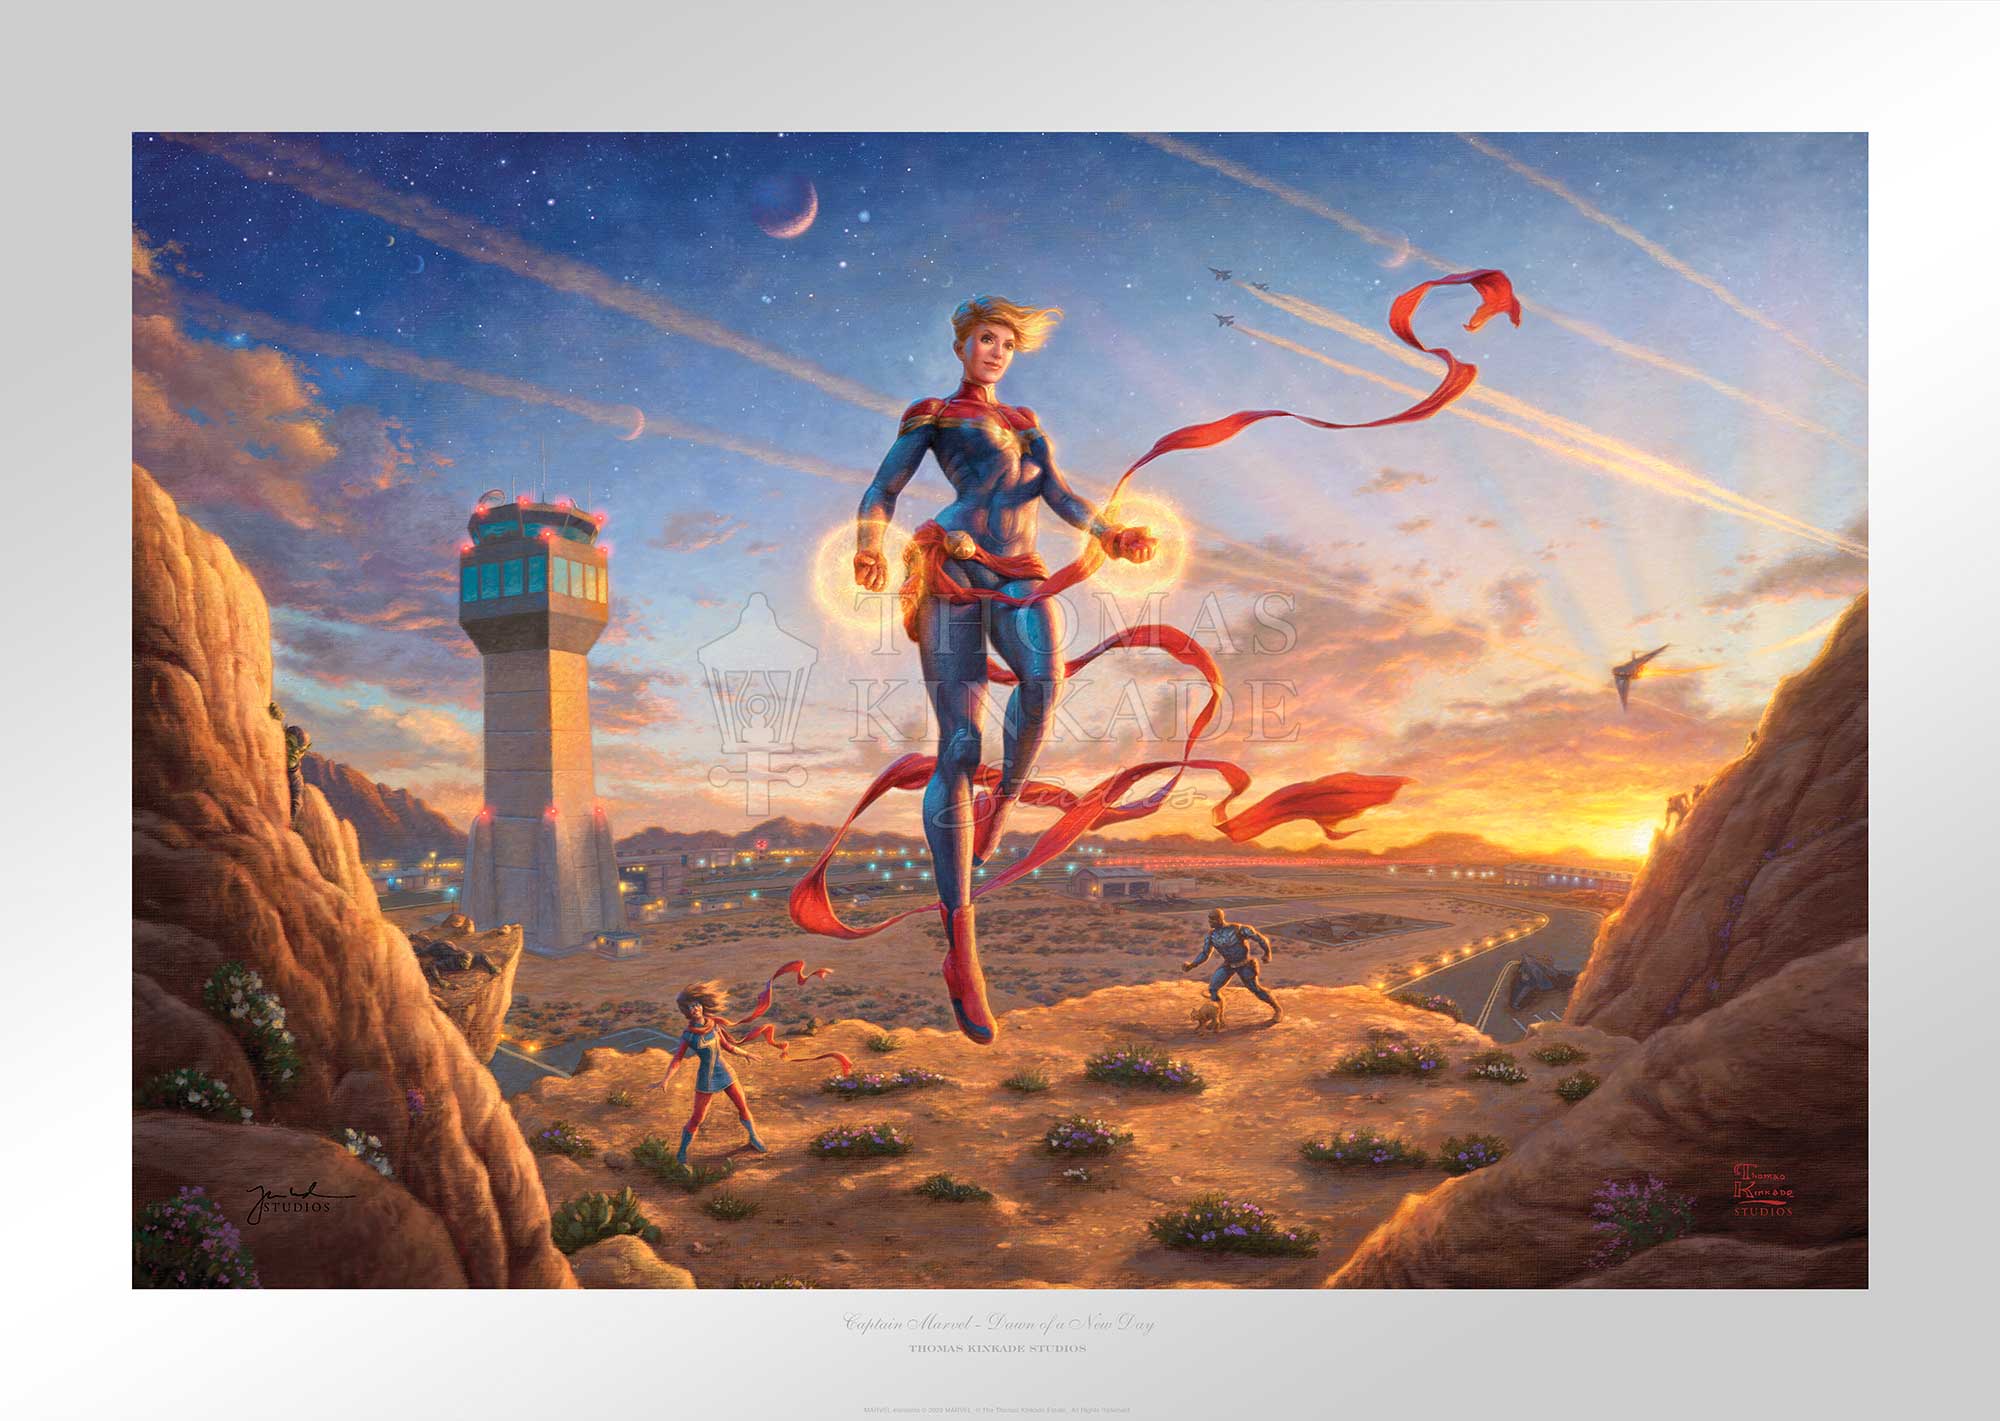 The morning sun dawns on a new day amplifying the glowing power emanating from Captain Marvel’s hands as she watches over the desert base.  - Unframed Paper